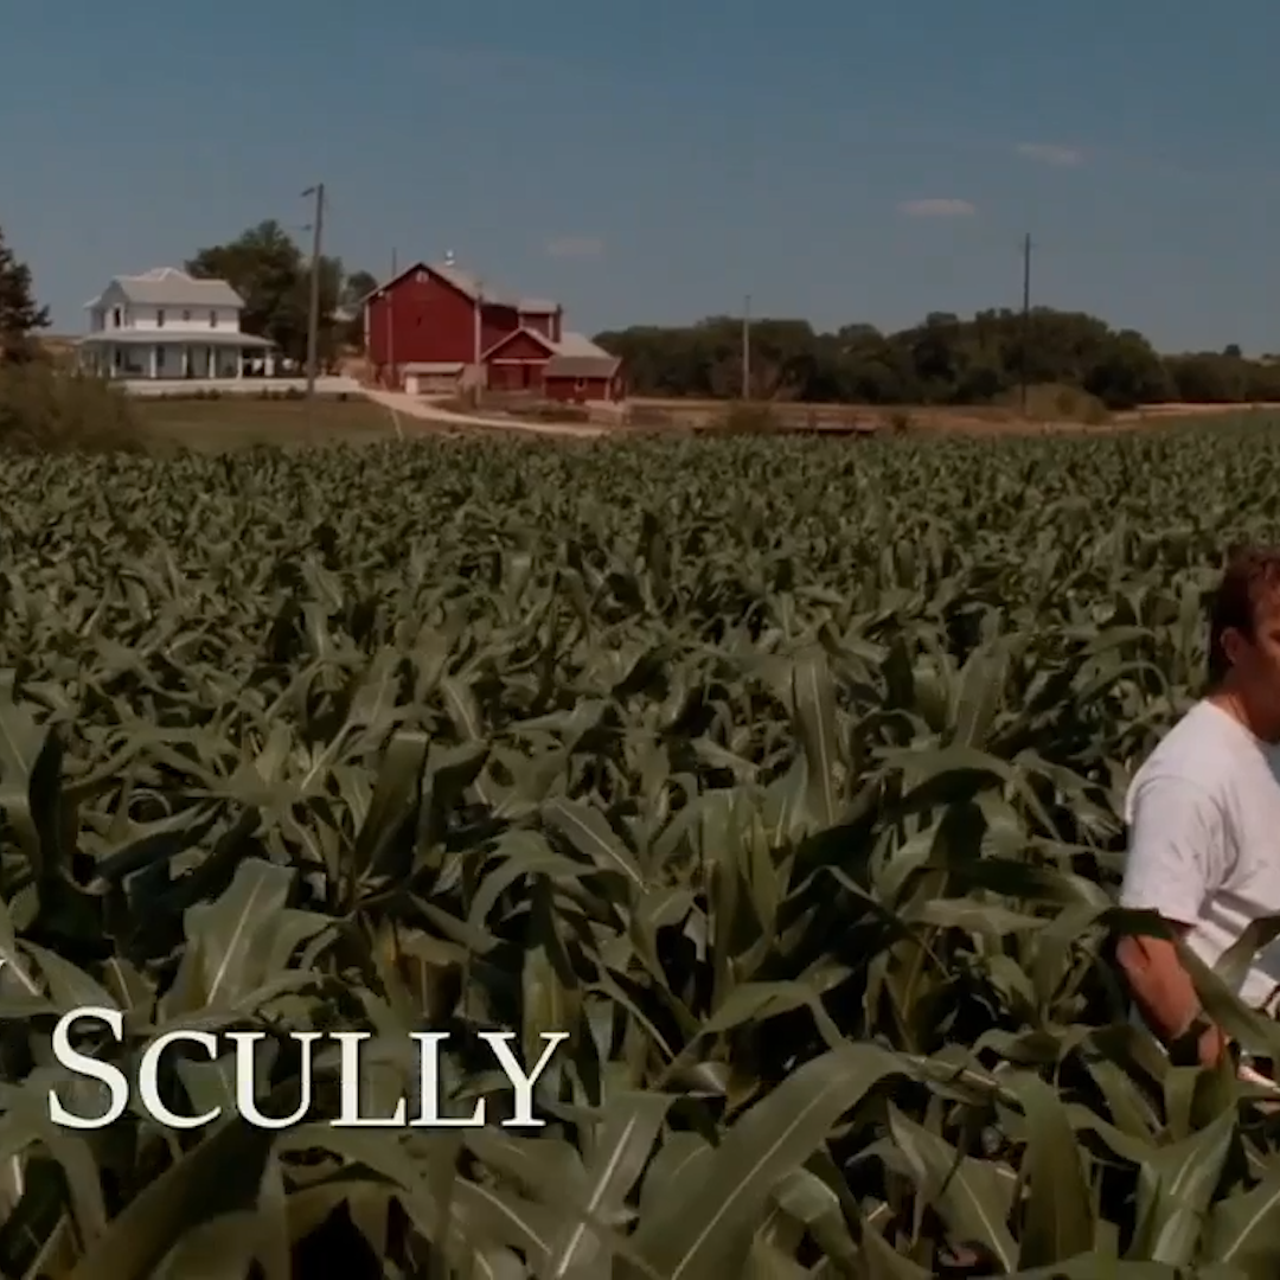 Vin Scully narrates a famous scene from the 'Field of Dreams